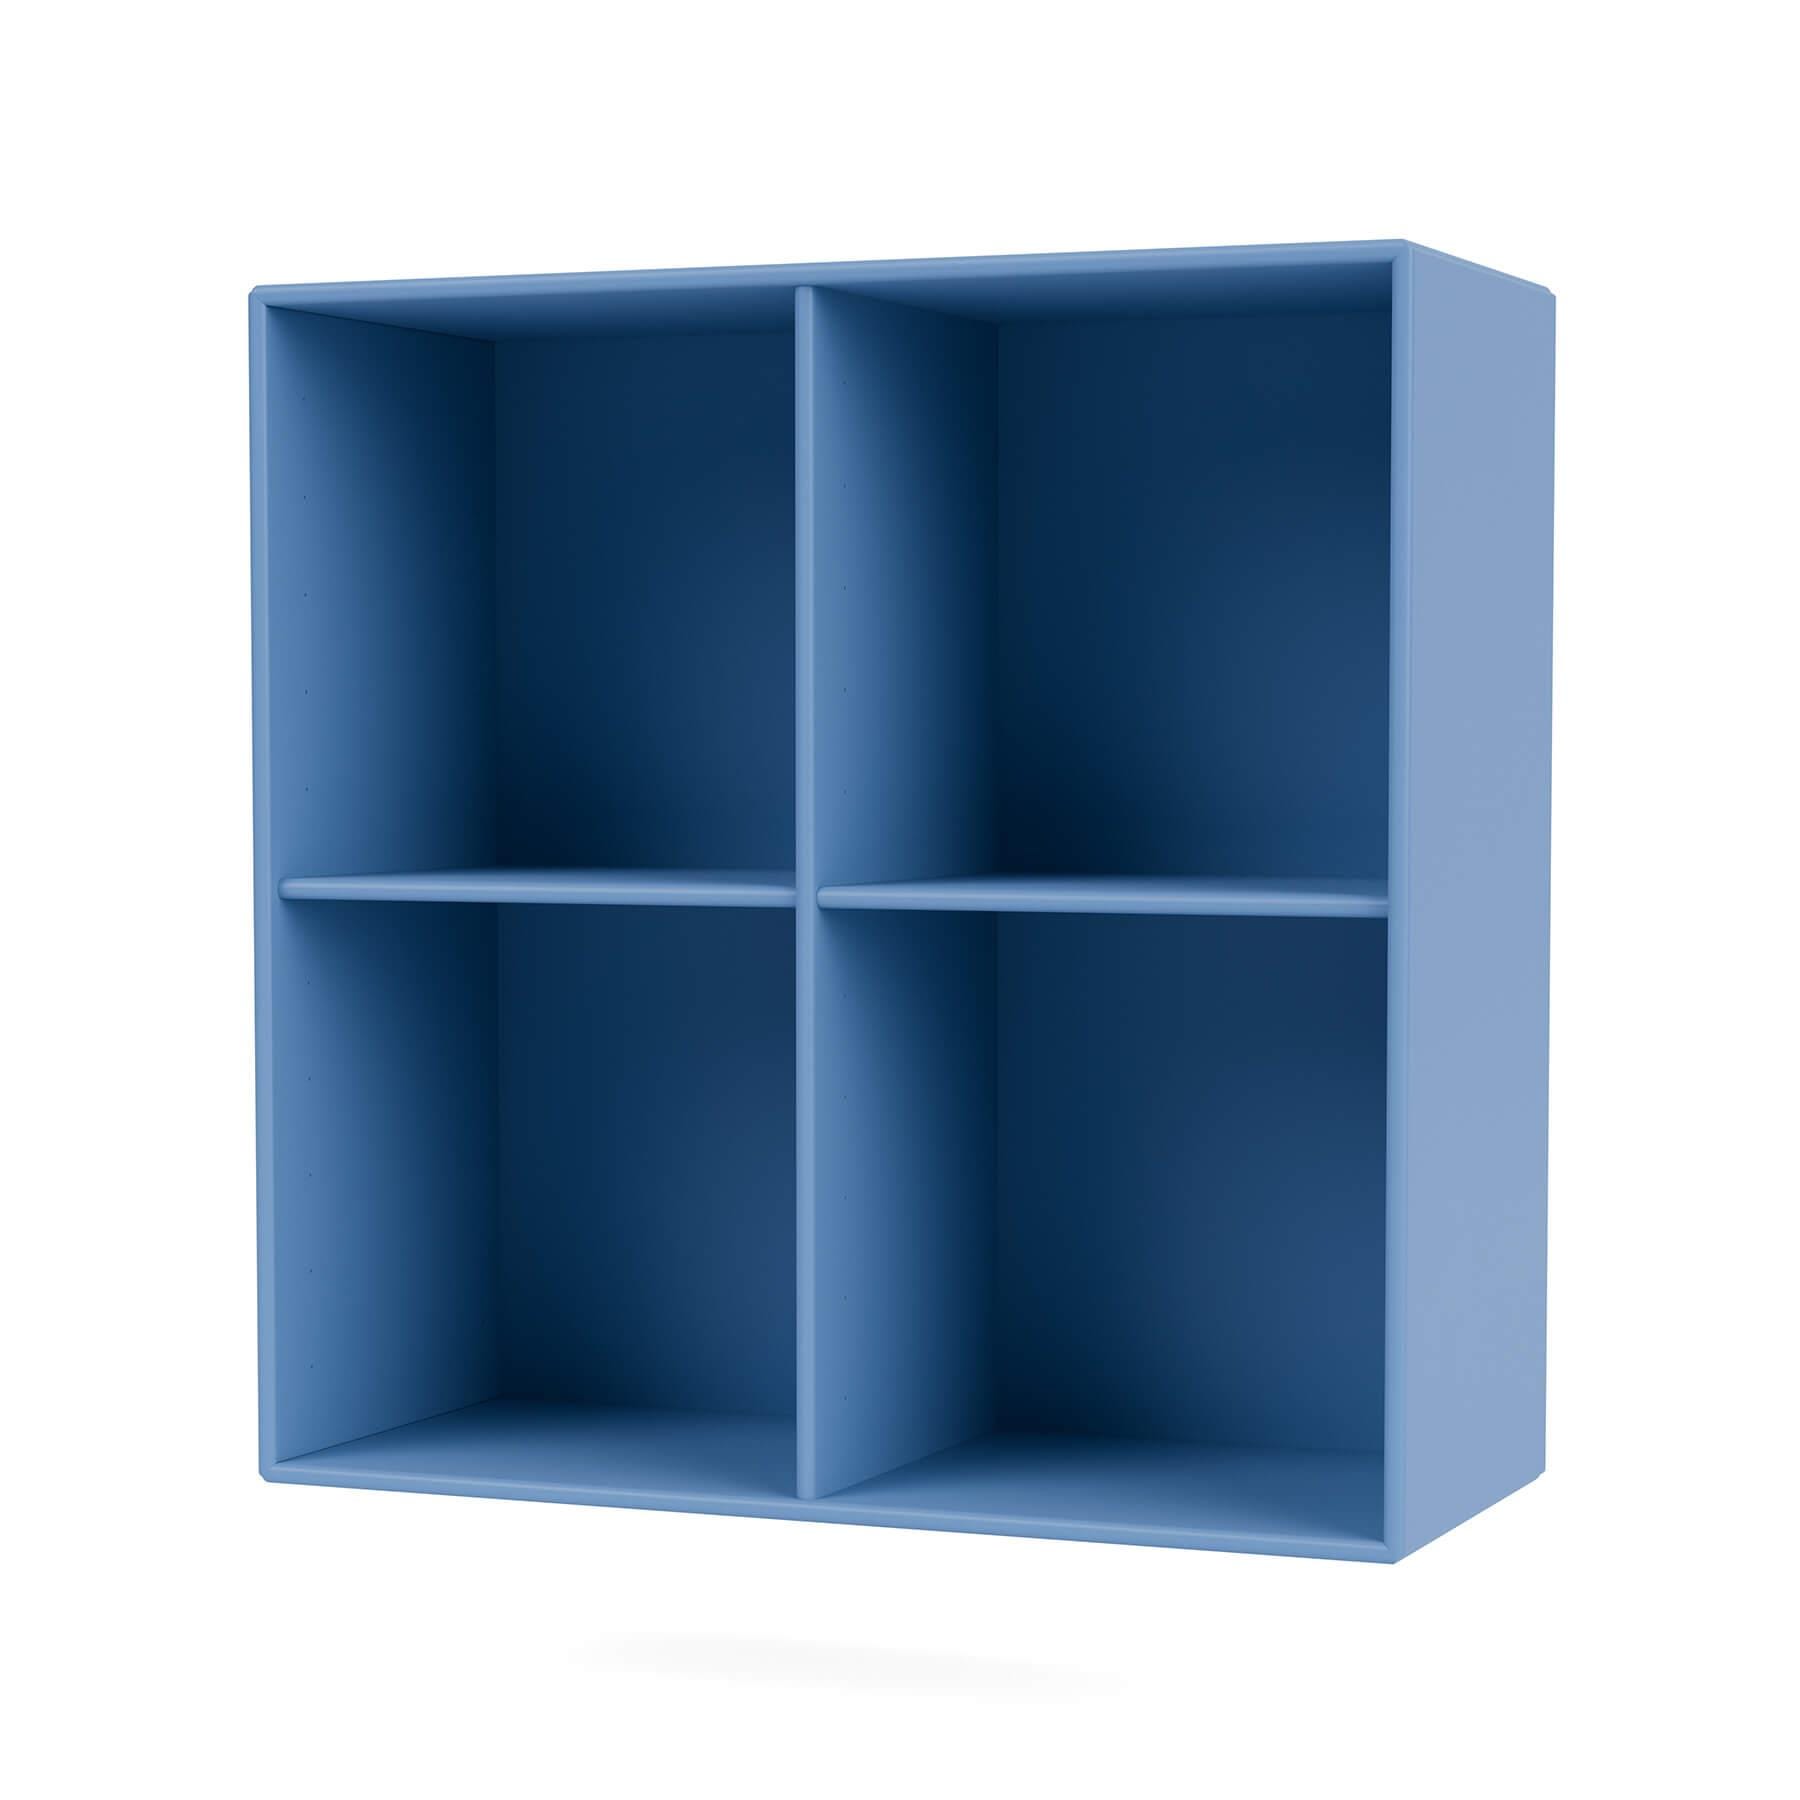 Montana Show Bookcase Azure Wall Mounted Blue Designer Furniture From Holloways Of Ludlow